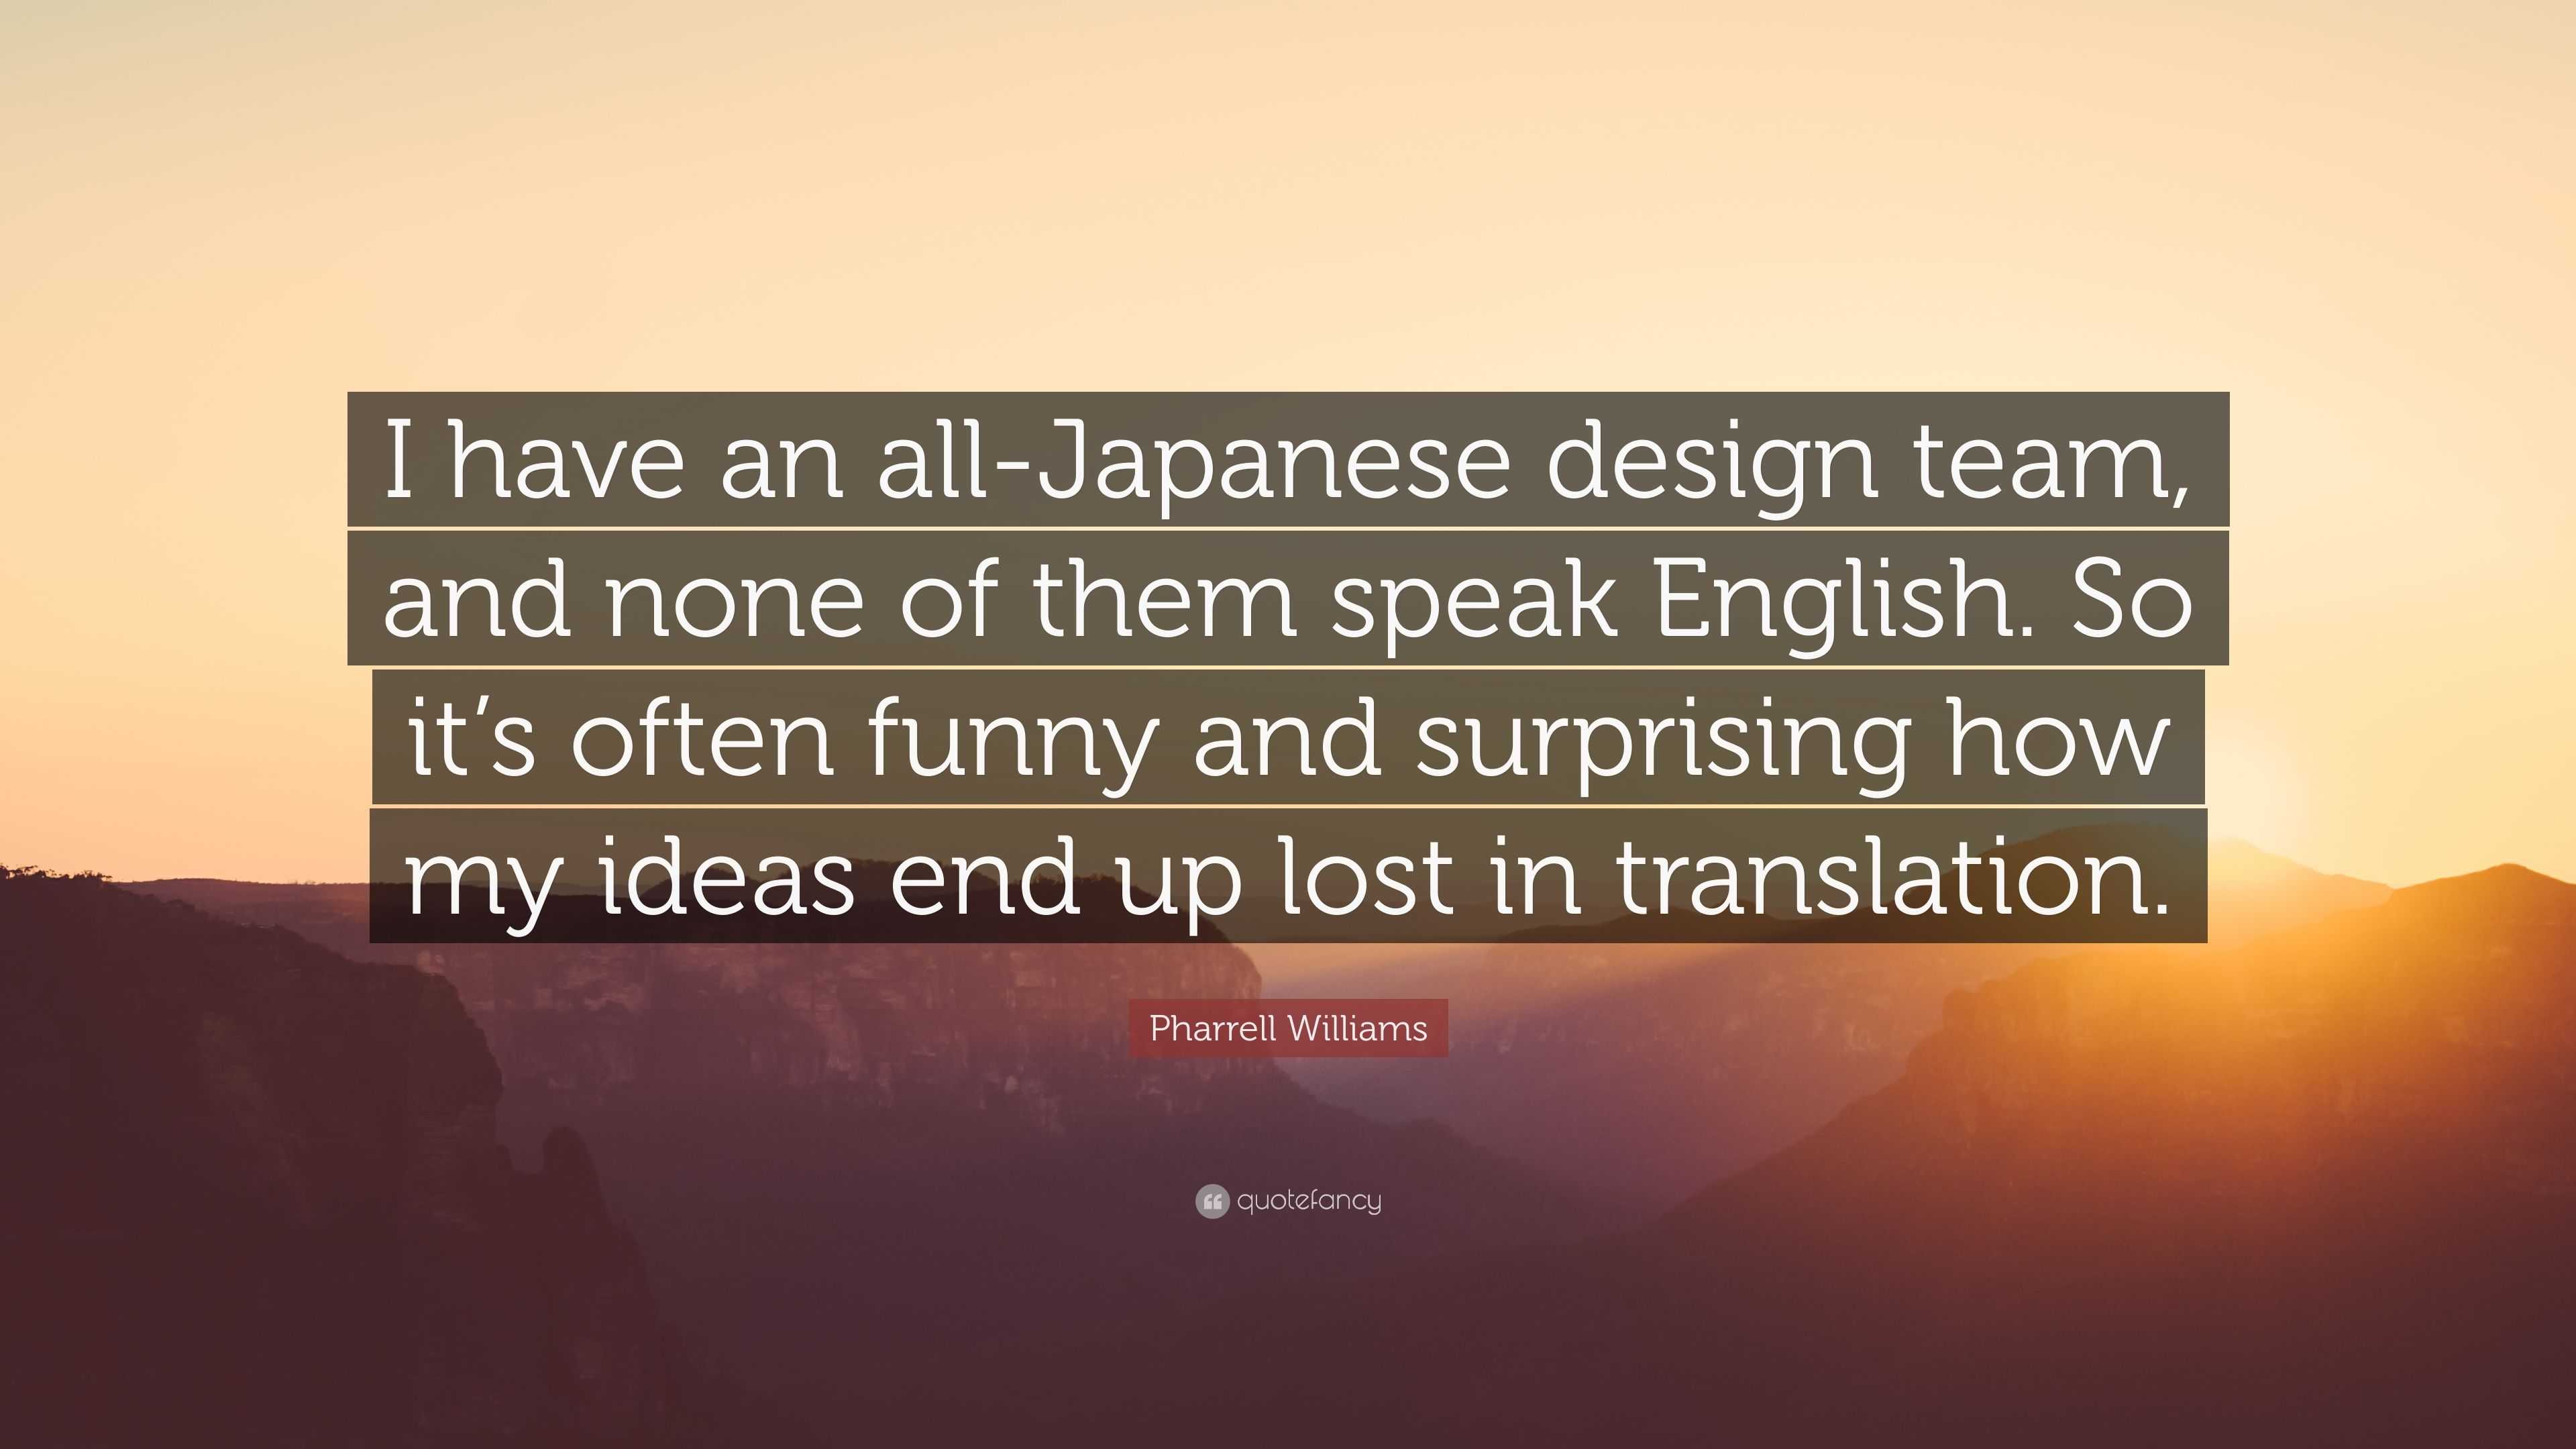 Pharrell Williams Quote I Have An All Japanese Design Team And None Of Them Speak English So It S Often Funny And Surprising How My Ideas End 7 Wallpapers Quotefancy